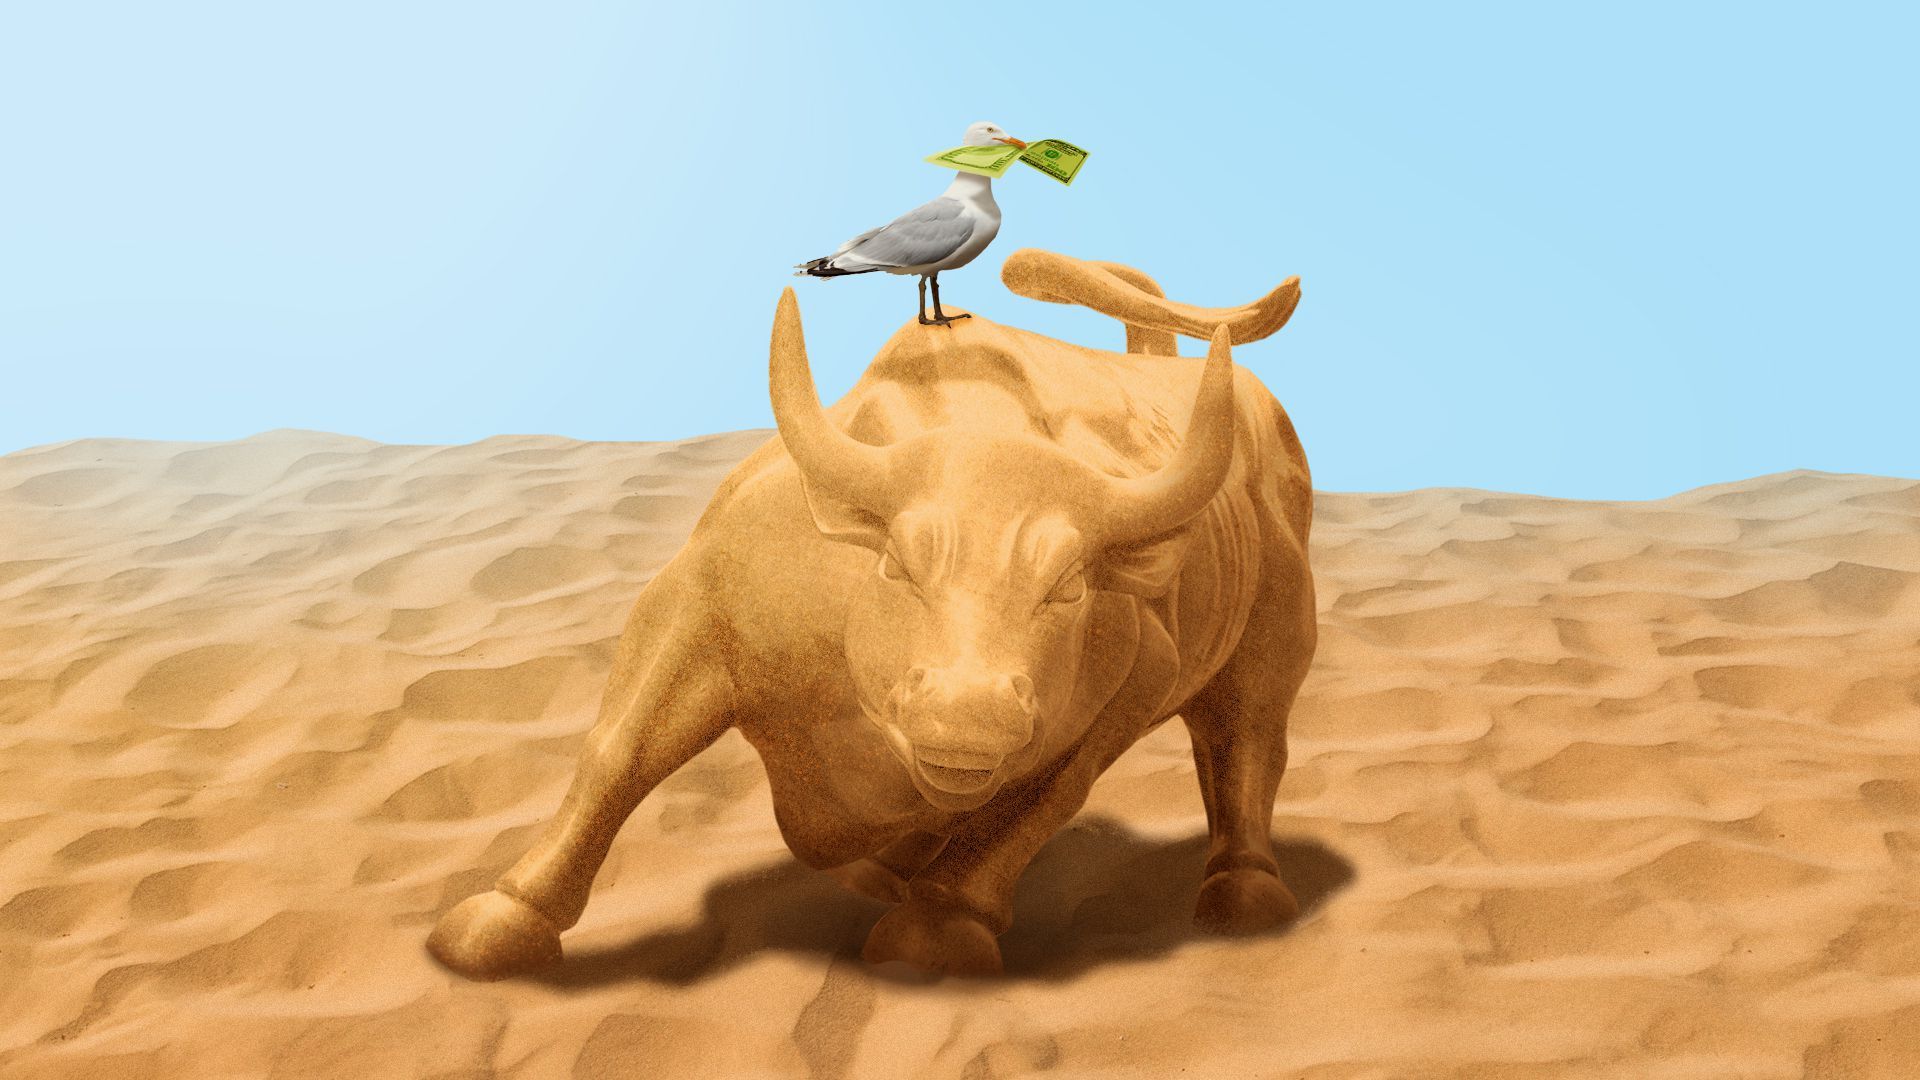 Illustration of a sand sculpture in the shape of the Wall Street Bull statue with a seagull on top